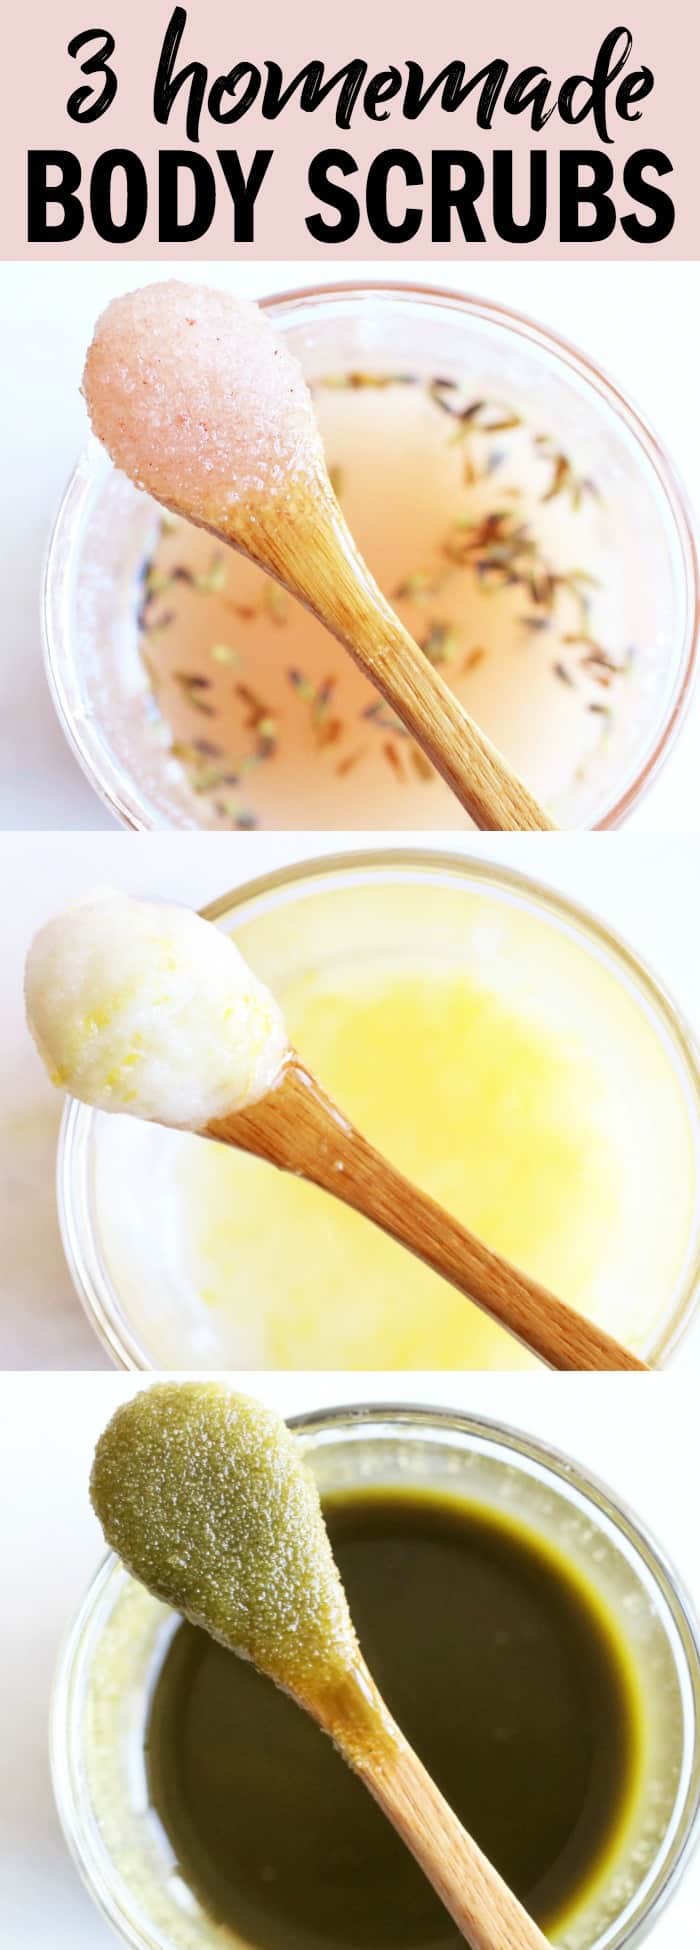 These 3 homemade body scrubs are the perfect DIY for your self care routine! I love each scent and love that each one sets a different tone! thetoastedpinenut.com #homemade #body #scrub #diy #howto #selfcare #wellness #thetoastedpinenut